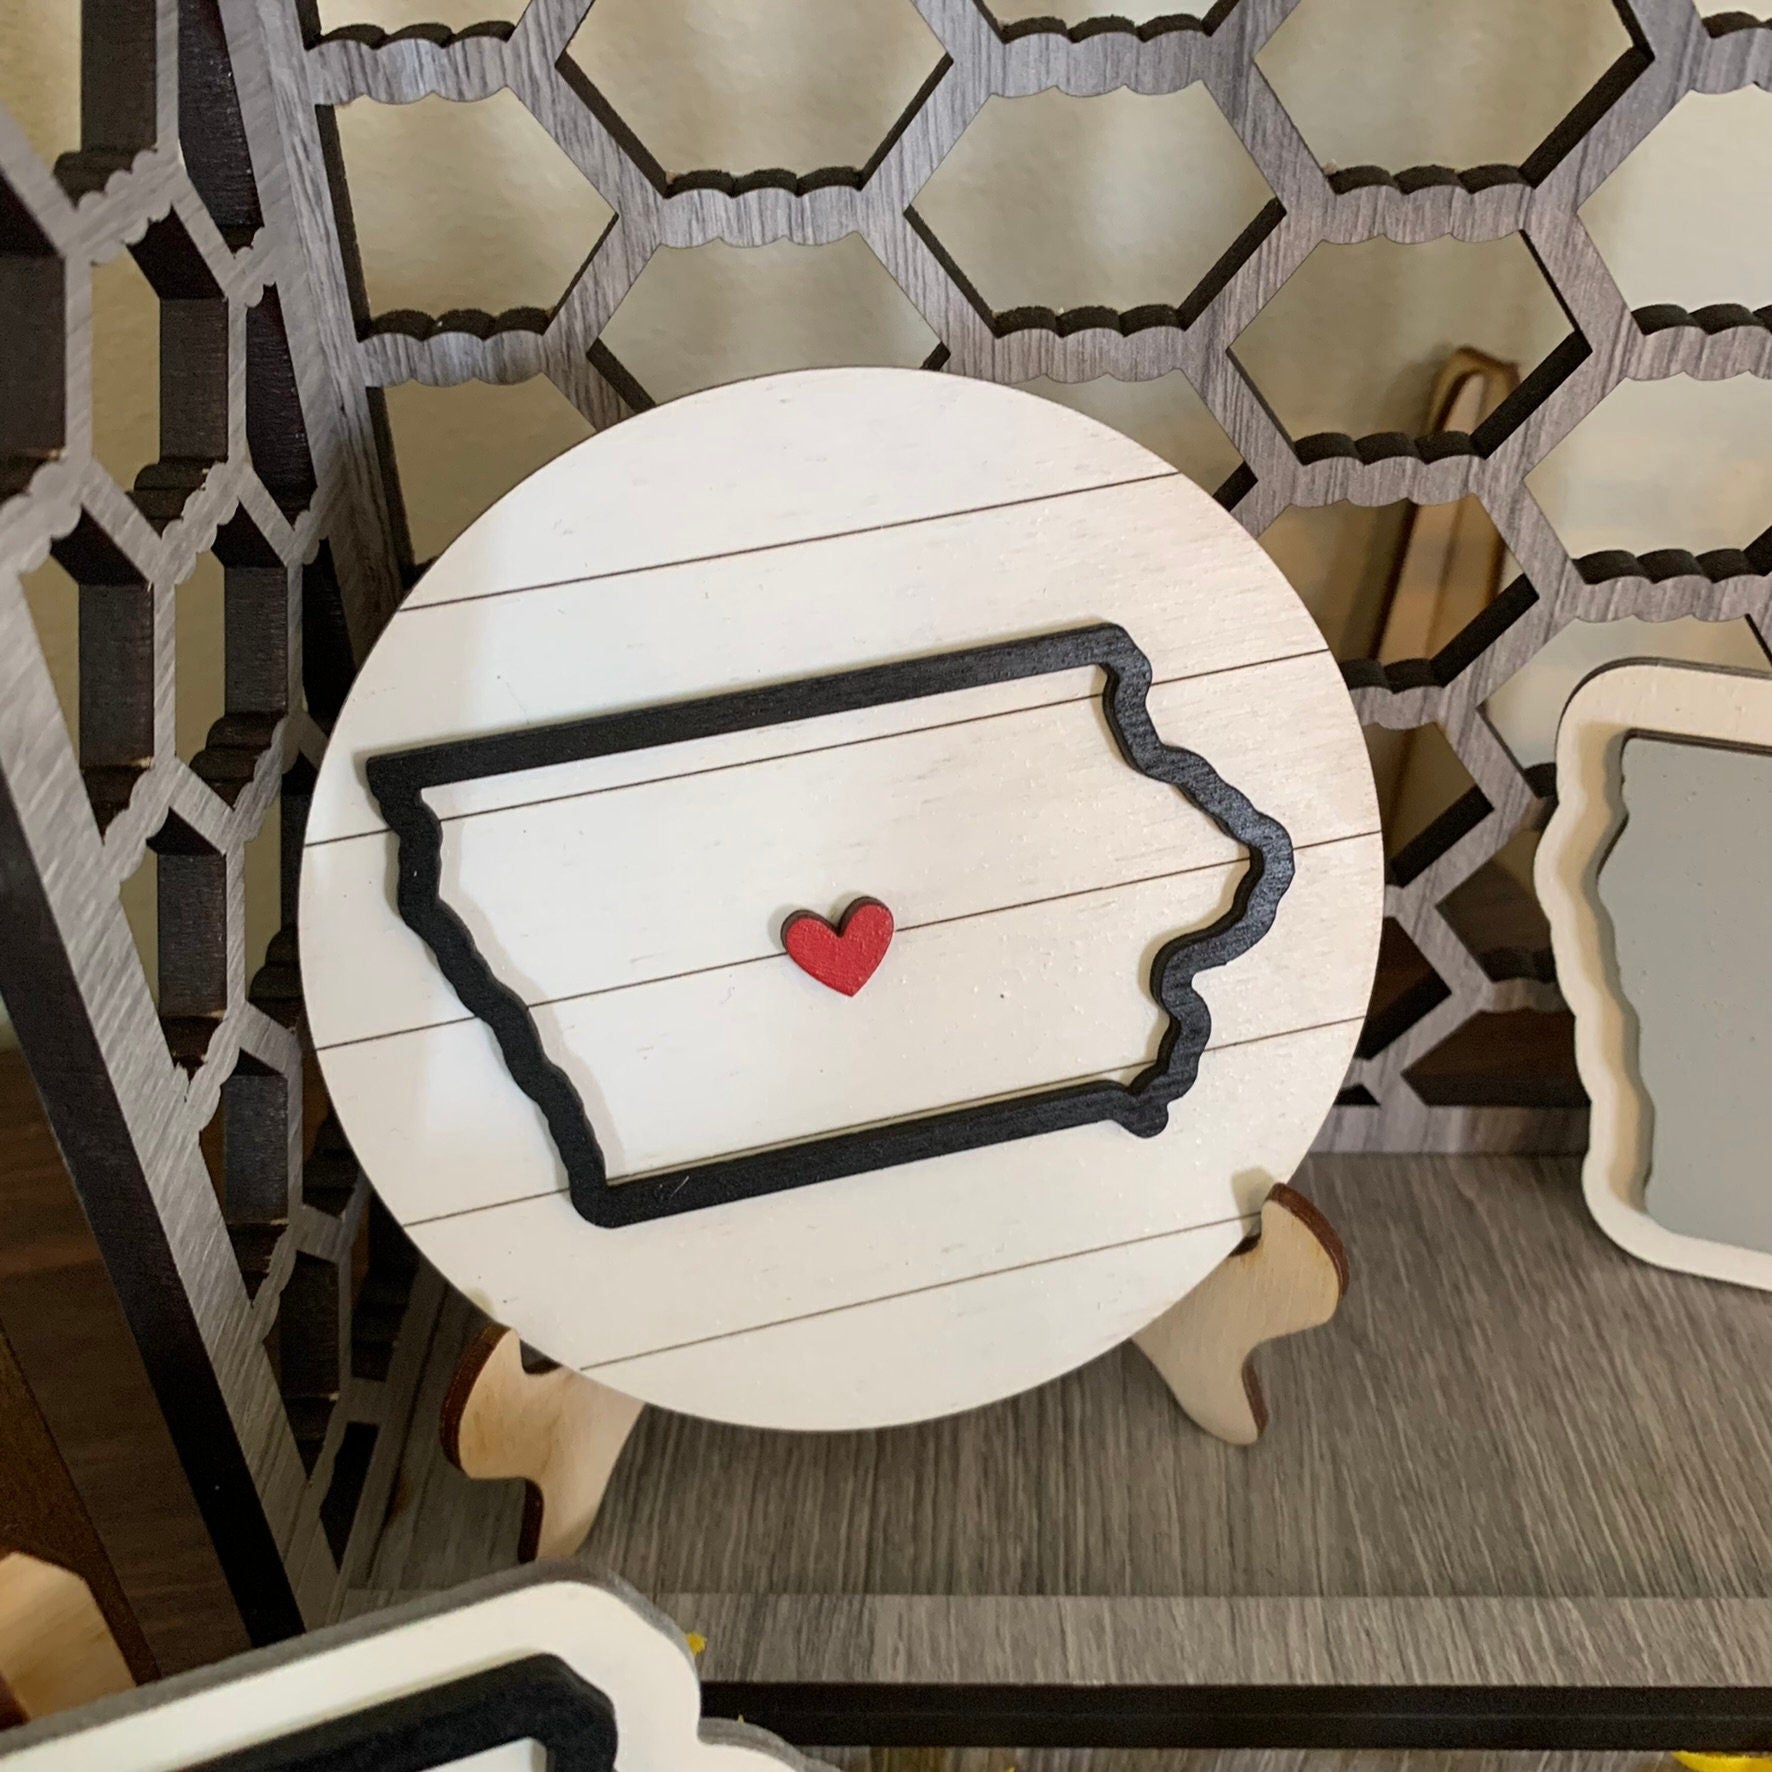 Iowa and Sweet Corn Theme Tiered Tray Decor - Laser Cut Wood Painted